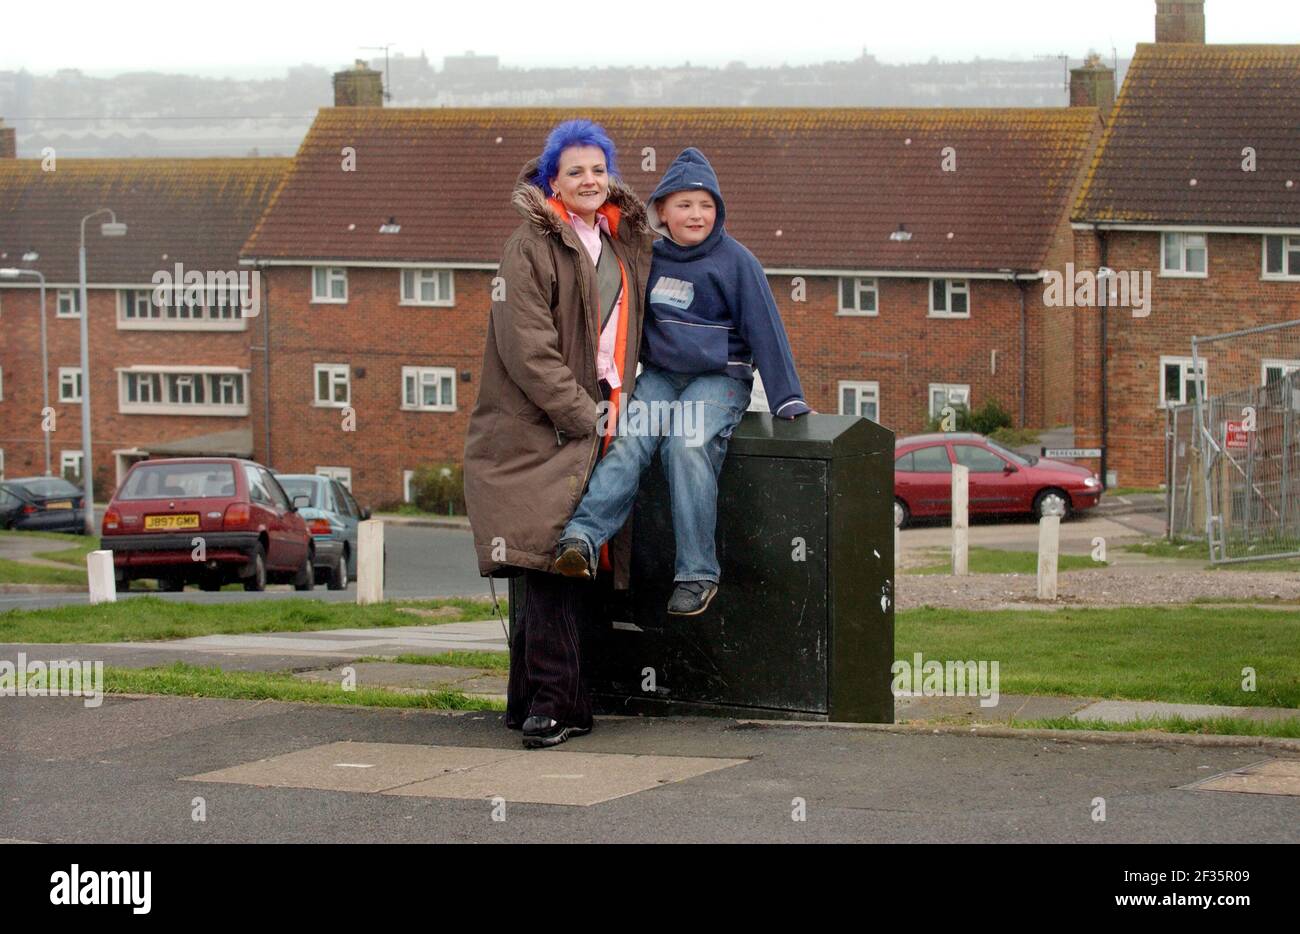 CHARLY CRAWFORD AND HER SON TRE,ON THE HOLLINGDEAN ESTATE IN BRIGHTON,WHICH HAS CREATED A NEIGHBOURHOOD AGREEMENT TO RAISE STANDARDS OF BEHAVIOUR AND COMMUNITY SPIRIT.7 April 2005 PILSTON Stock Photo